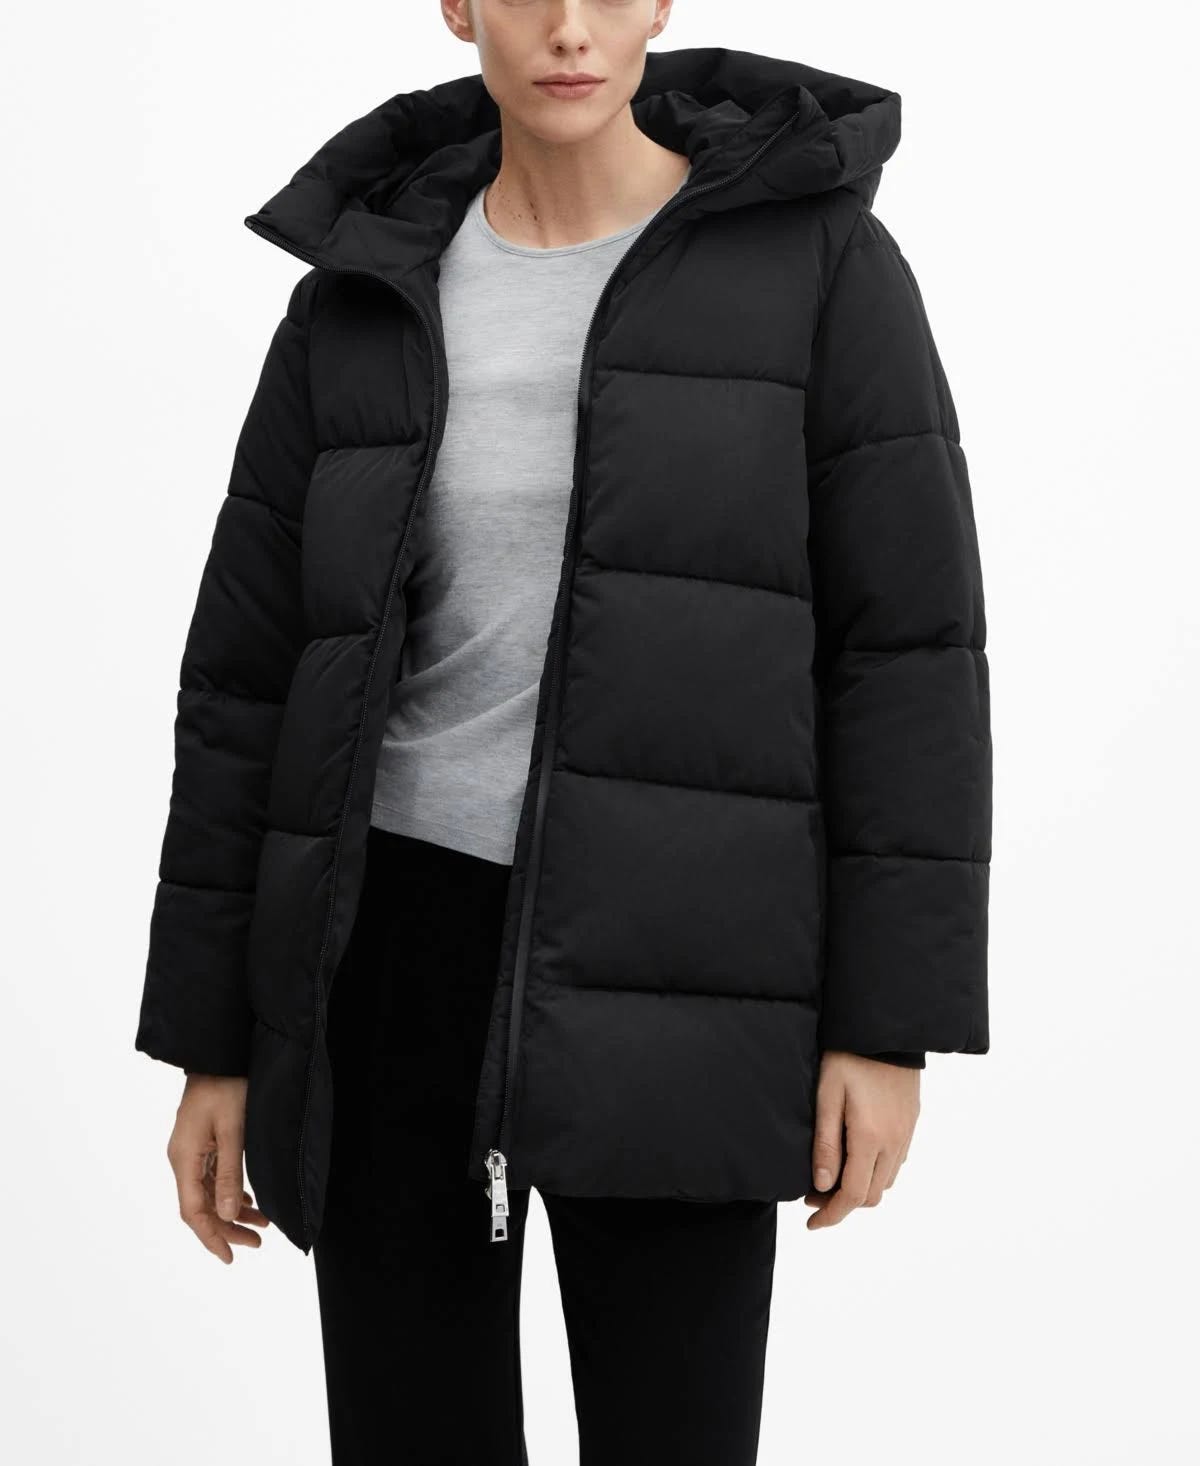 Mango Black Hooded Quilted Coat for Women | Image